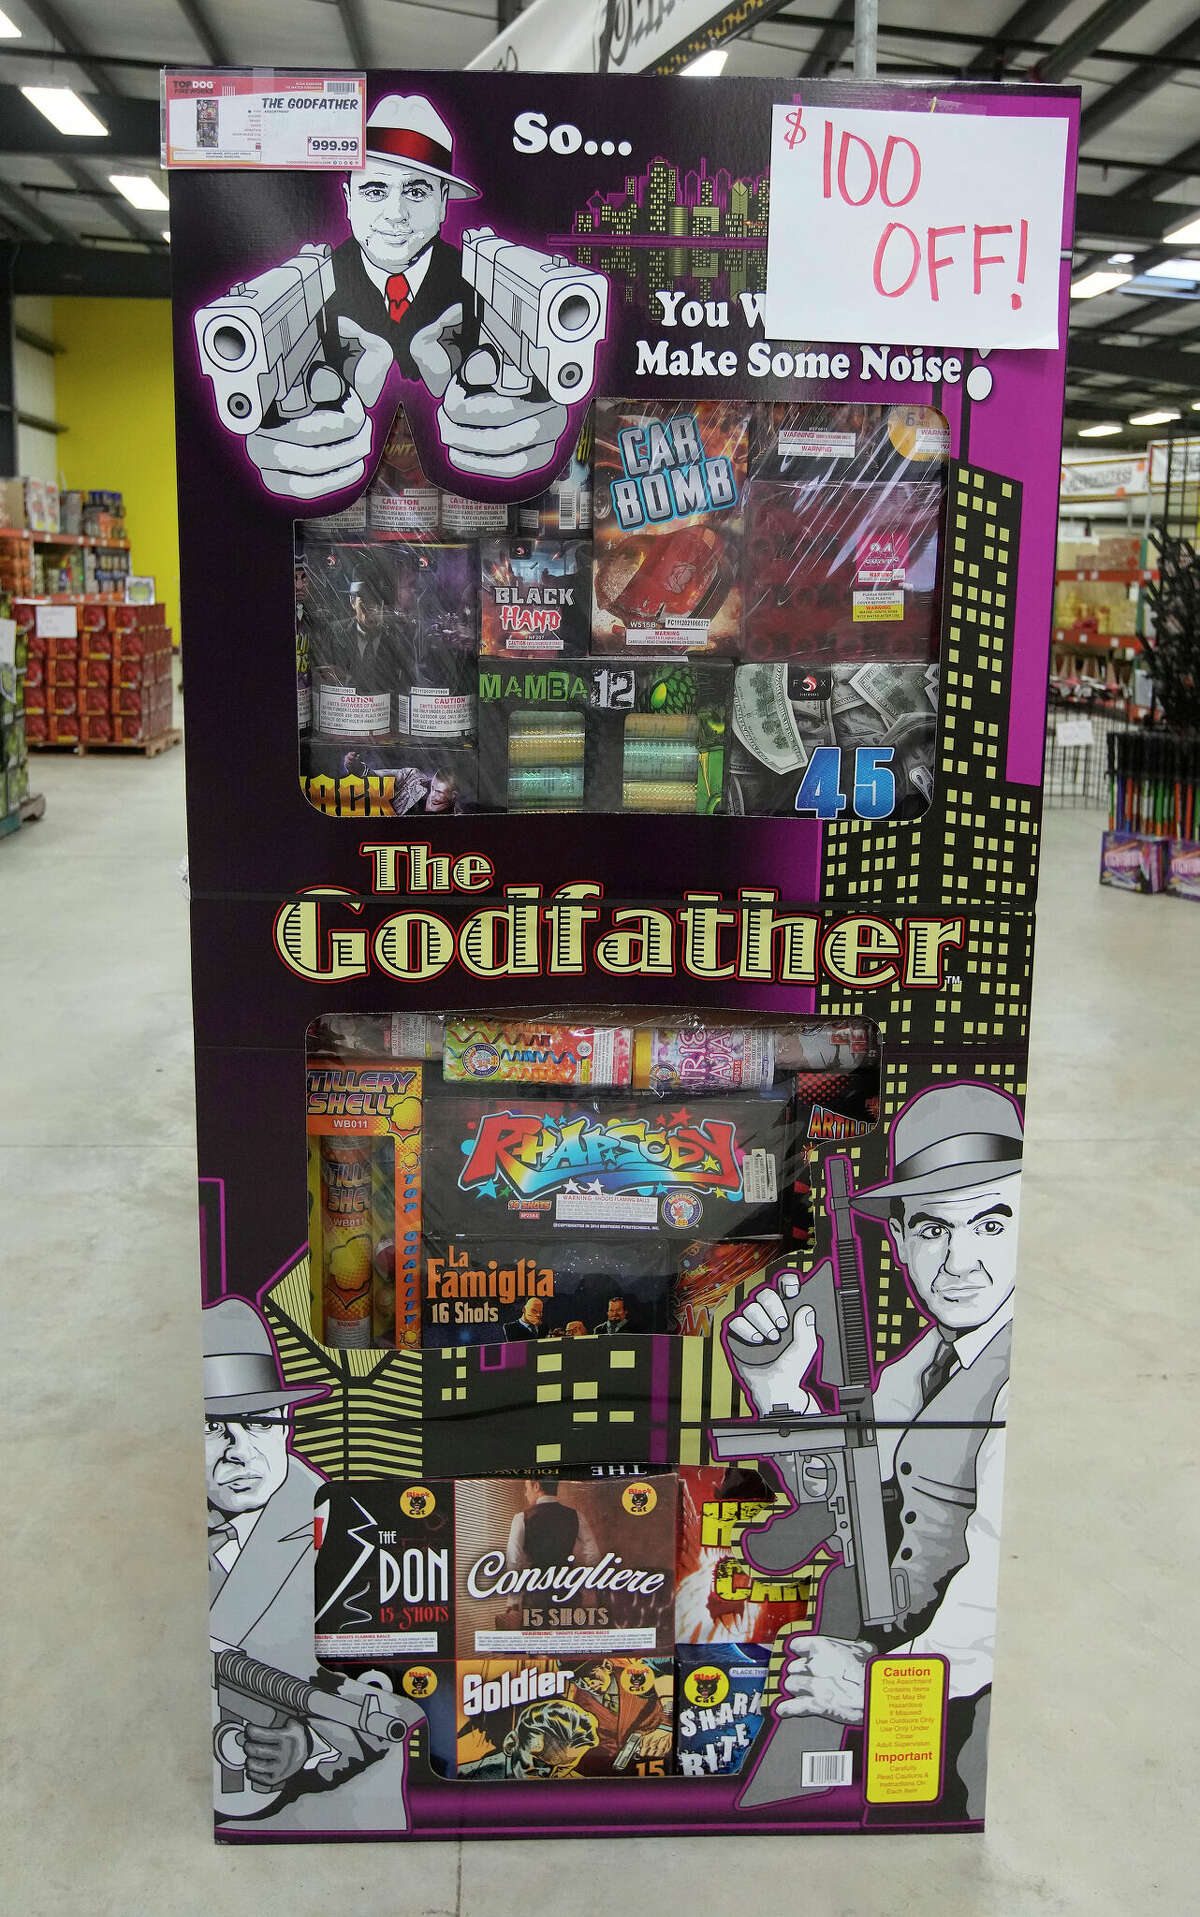 Detail of The Godfather package of fireworks at Top Dog Fireworks on Friday, Dec. 30, 2022.